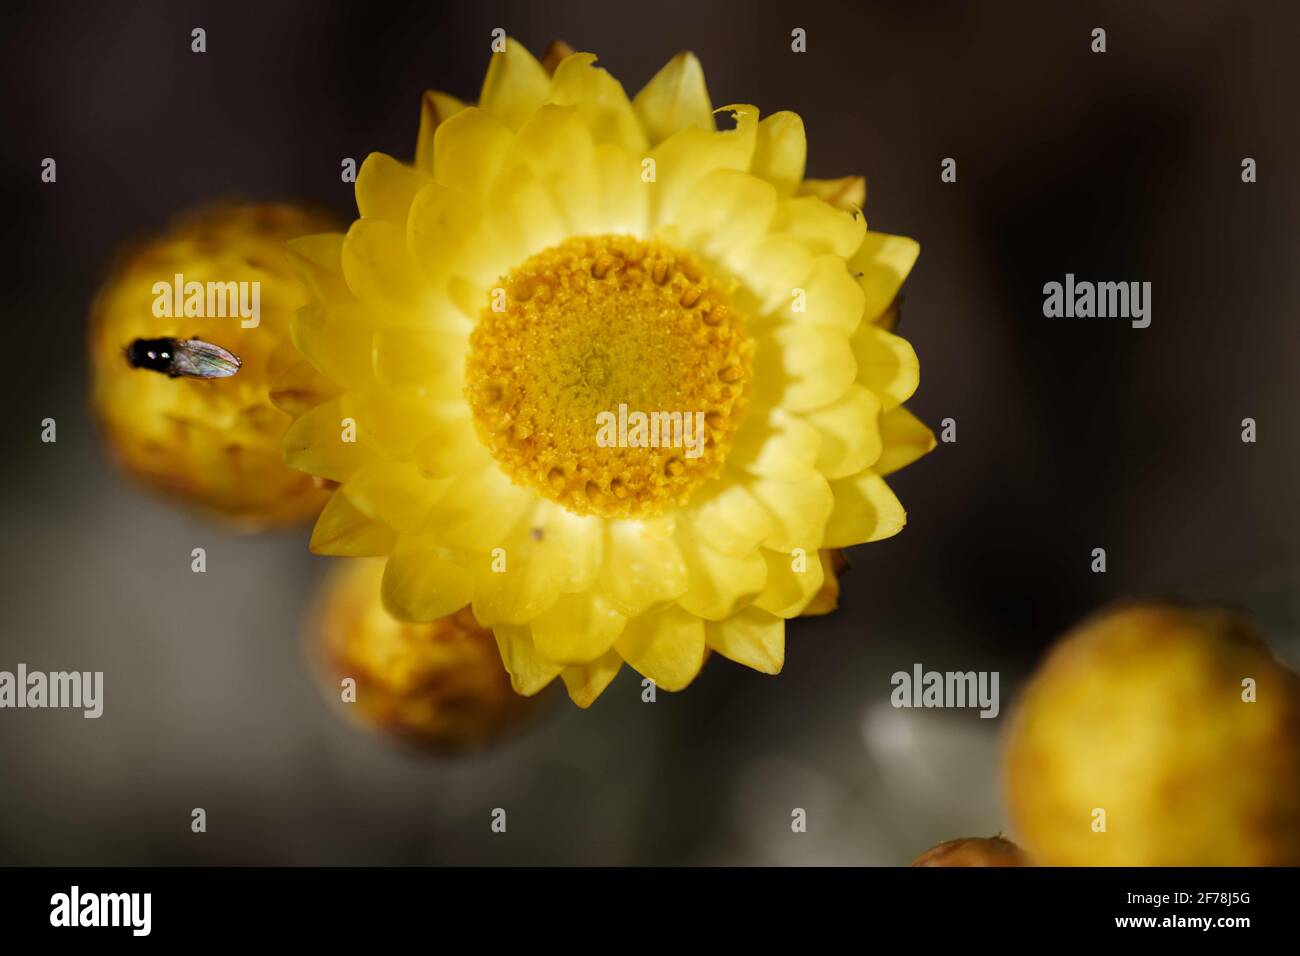 Helichrysum argyrophyllum: The flowers are daisy-like with canary yellow rays surrounding a darker yellow centre, flowering from December to May. Stock Photo